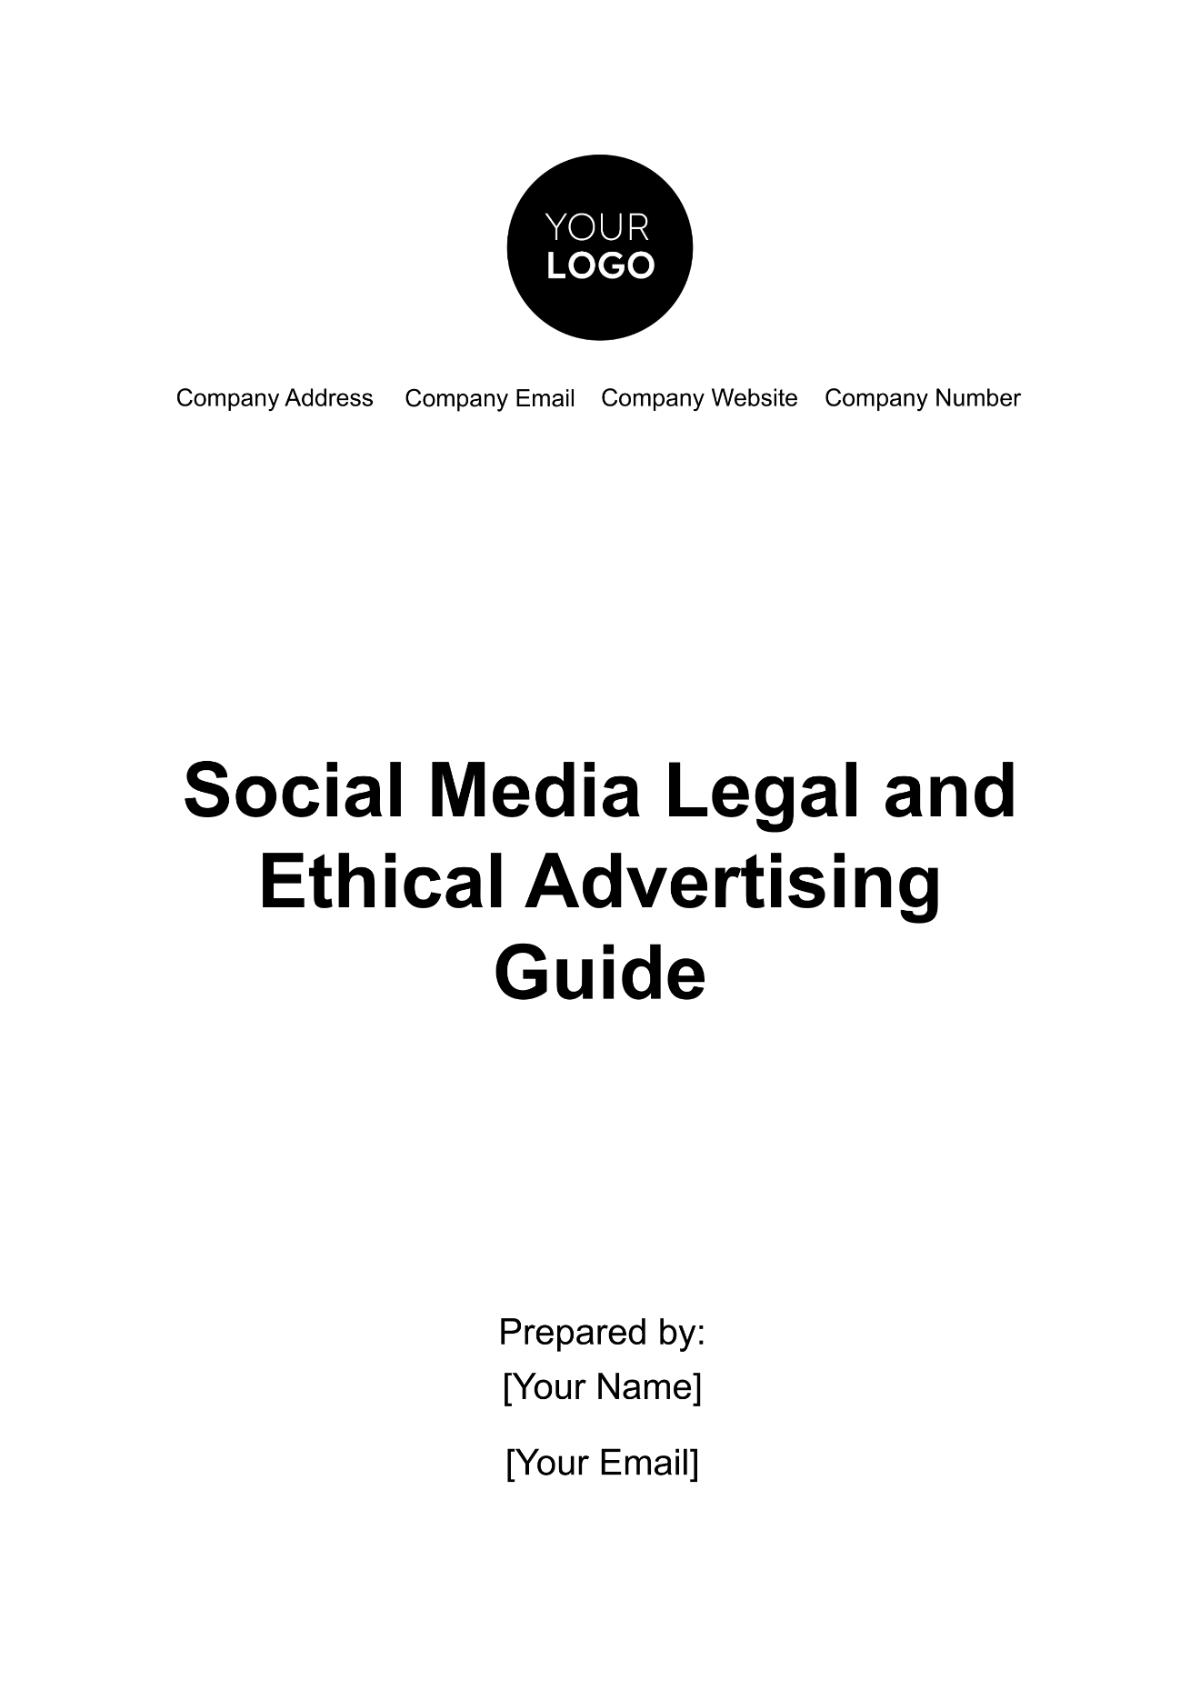 Social Media Legal and Ethical Advertising Guide Template